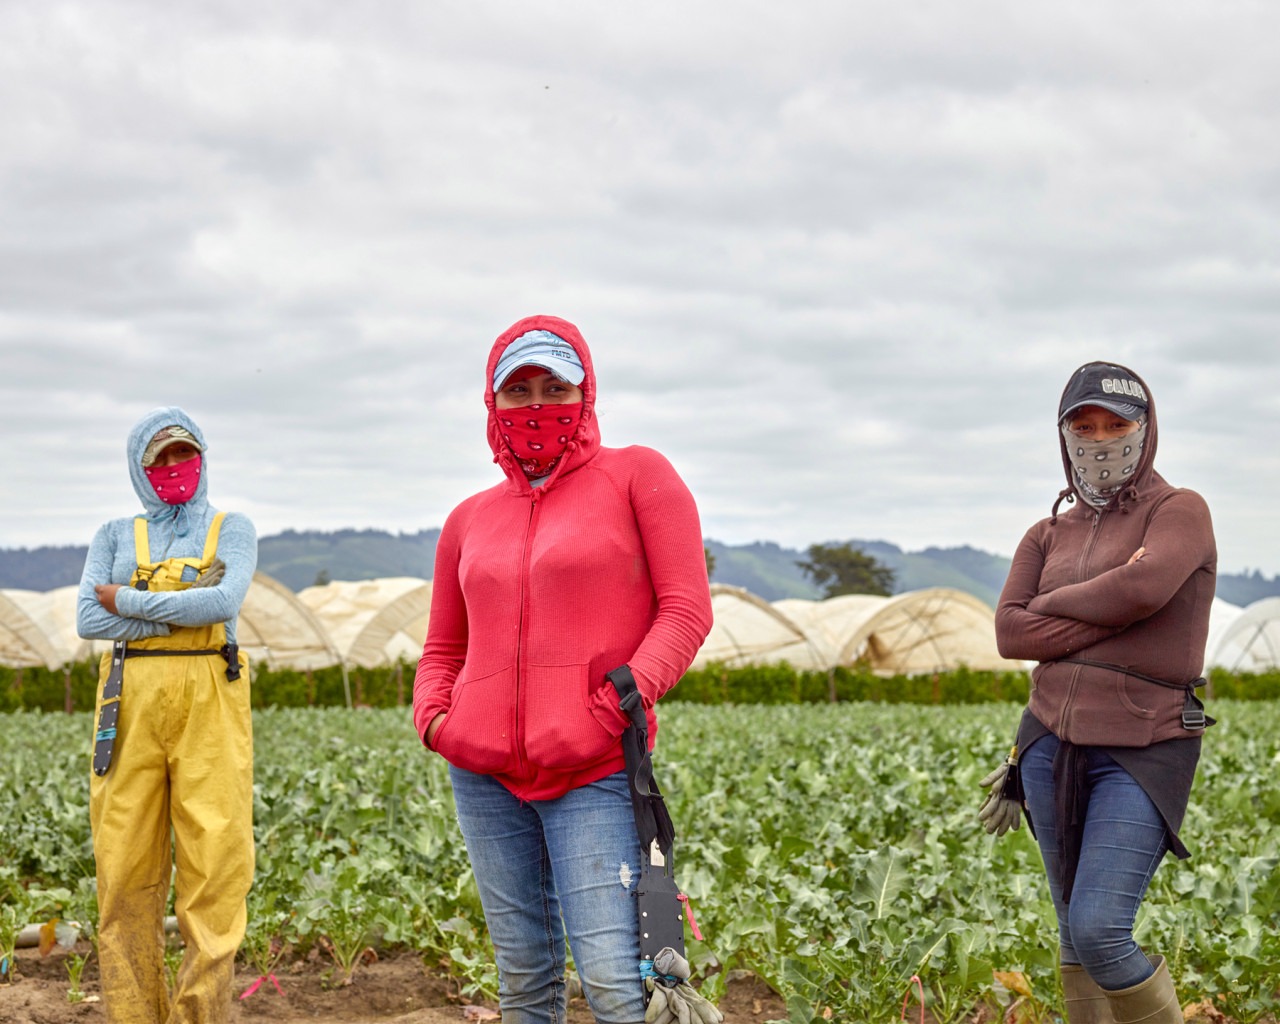 Three field workers stand in a crop field with green leafy plants, dressed in protective clothing and face coverings. Behind them are several greenhouse structures under a cloudy sky. Two individuals stand with arms crossed, while the one in the center has hands in pockets—an evocative scene for a Berkeley Journalism feature.